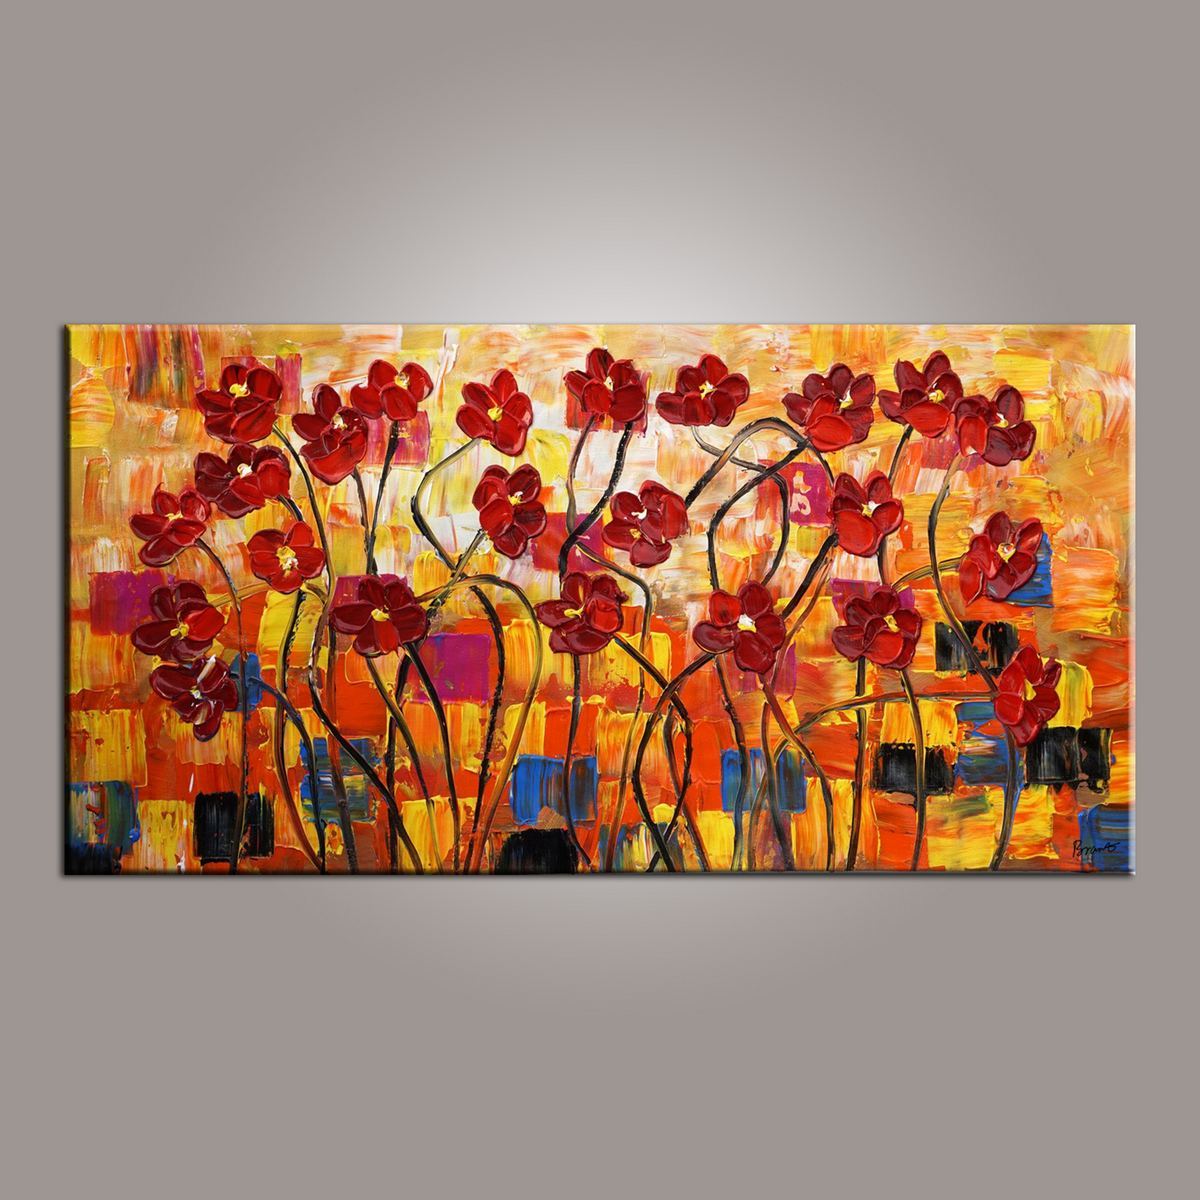 Spring Flower Painting, Canvas Wall Art, Painting for Sale, Flower Art, Abstract Art Painting, Bedroom Wall Art, Canvas Art, Modern Art, Contemporary Art-Art Painting Canvas